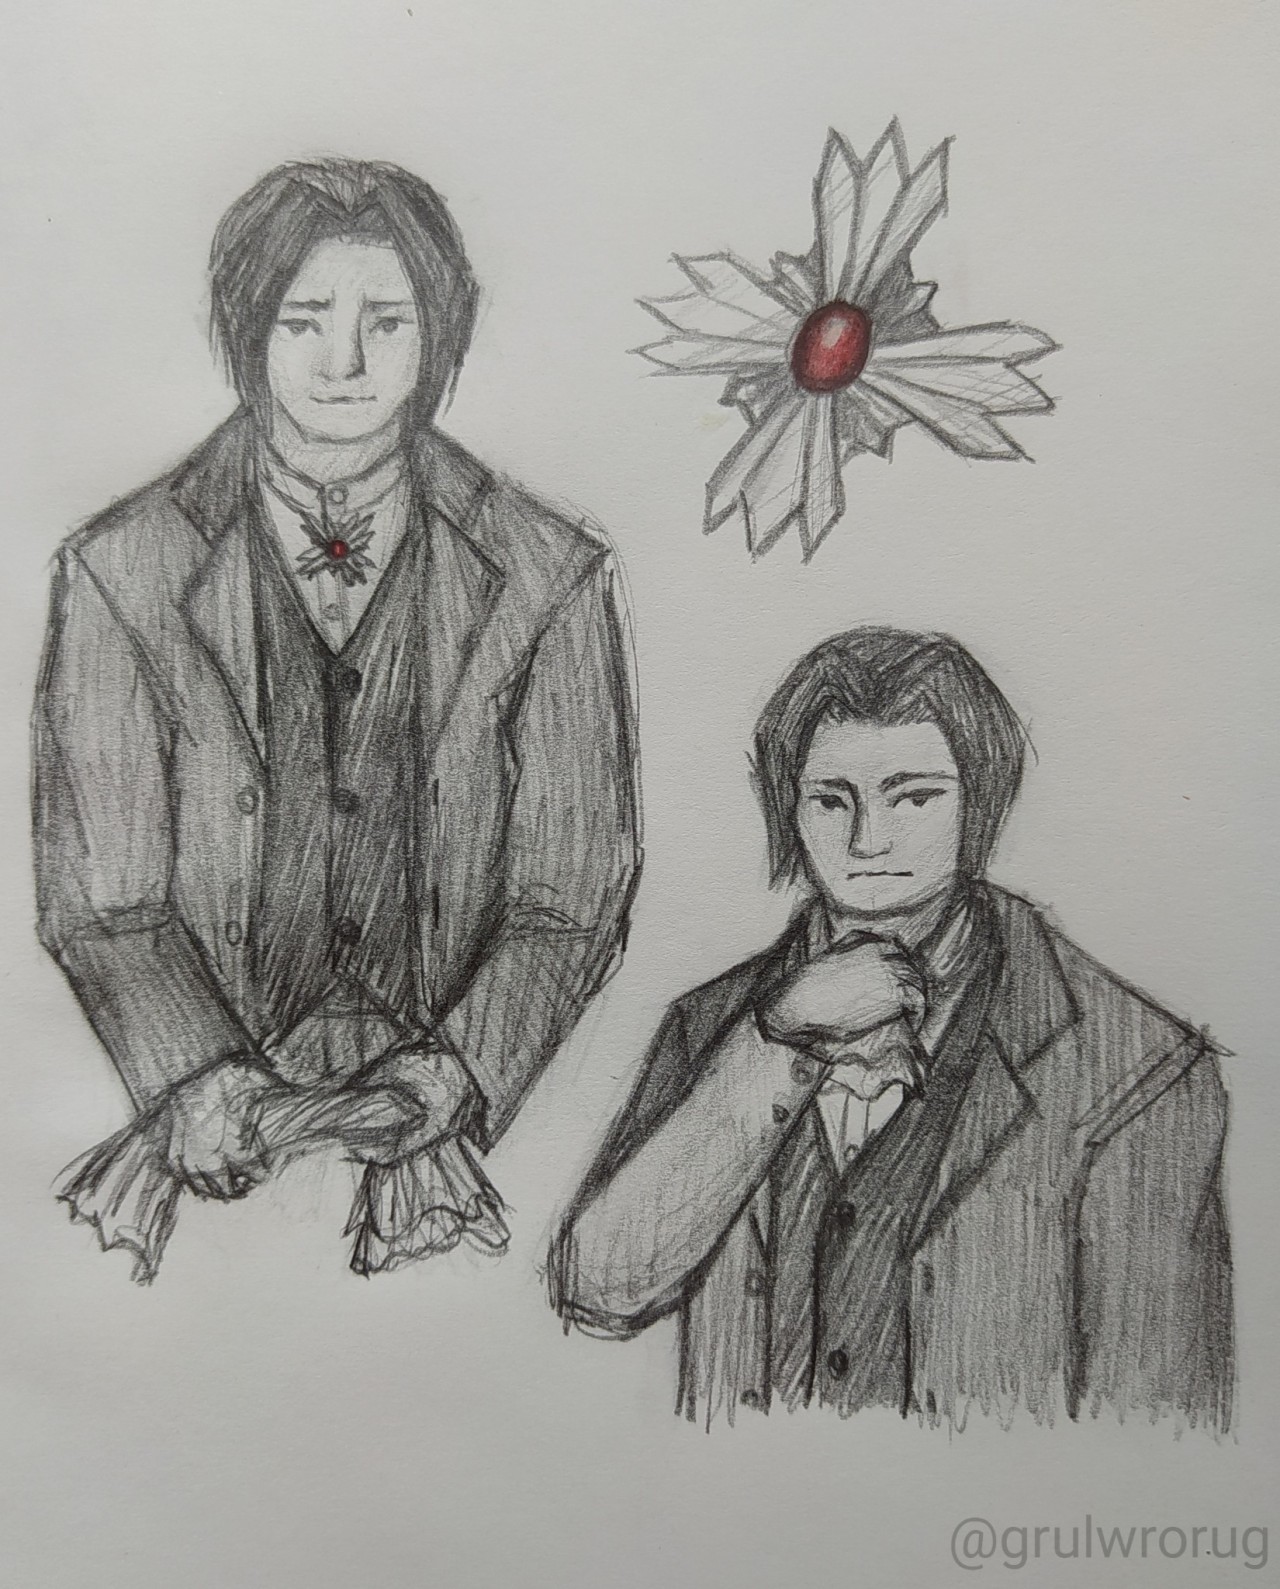 Fanart That Is Not Gzsz I Thought It Would Be Funny If Edgeworth Wore His